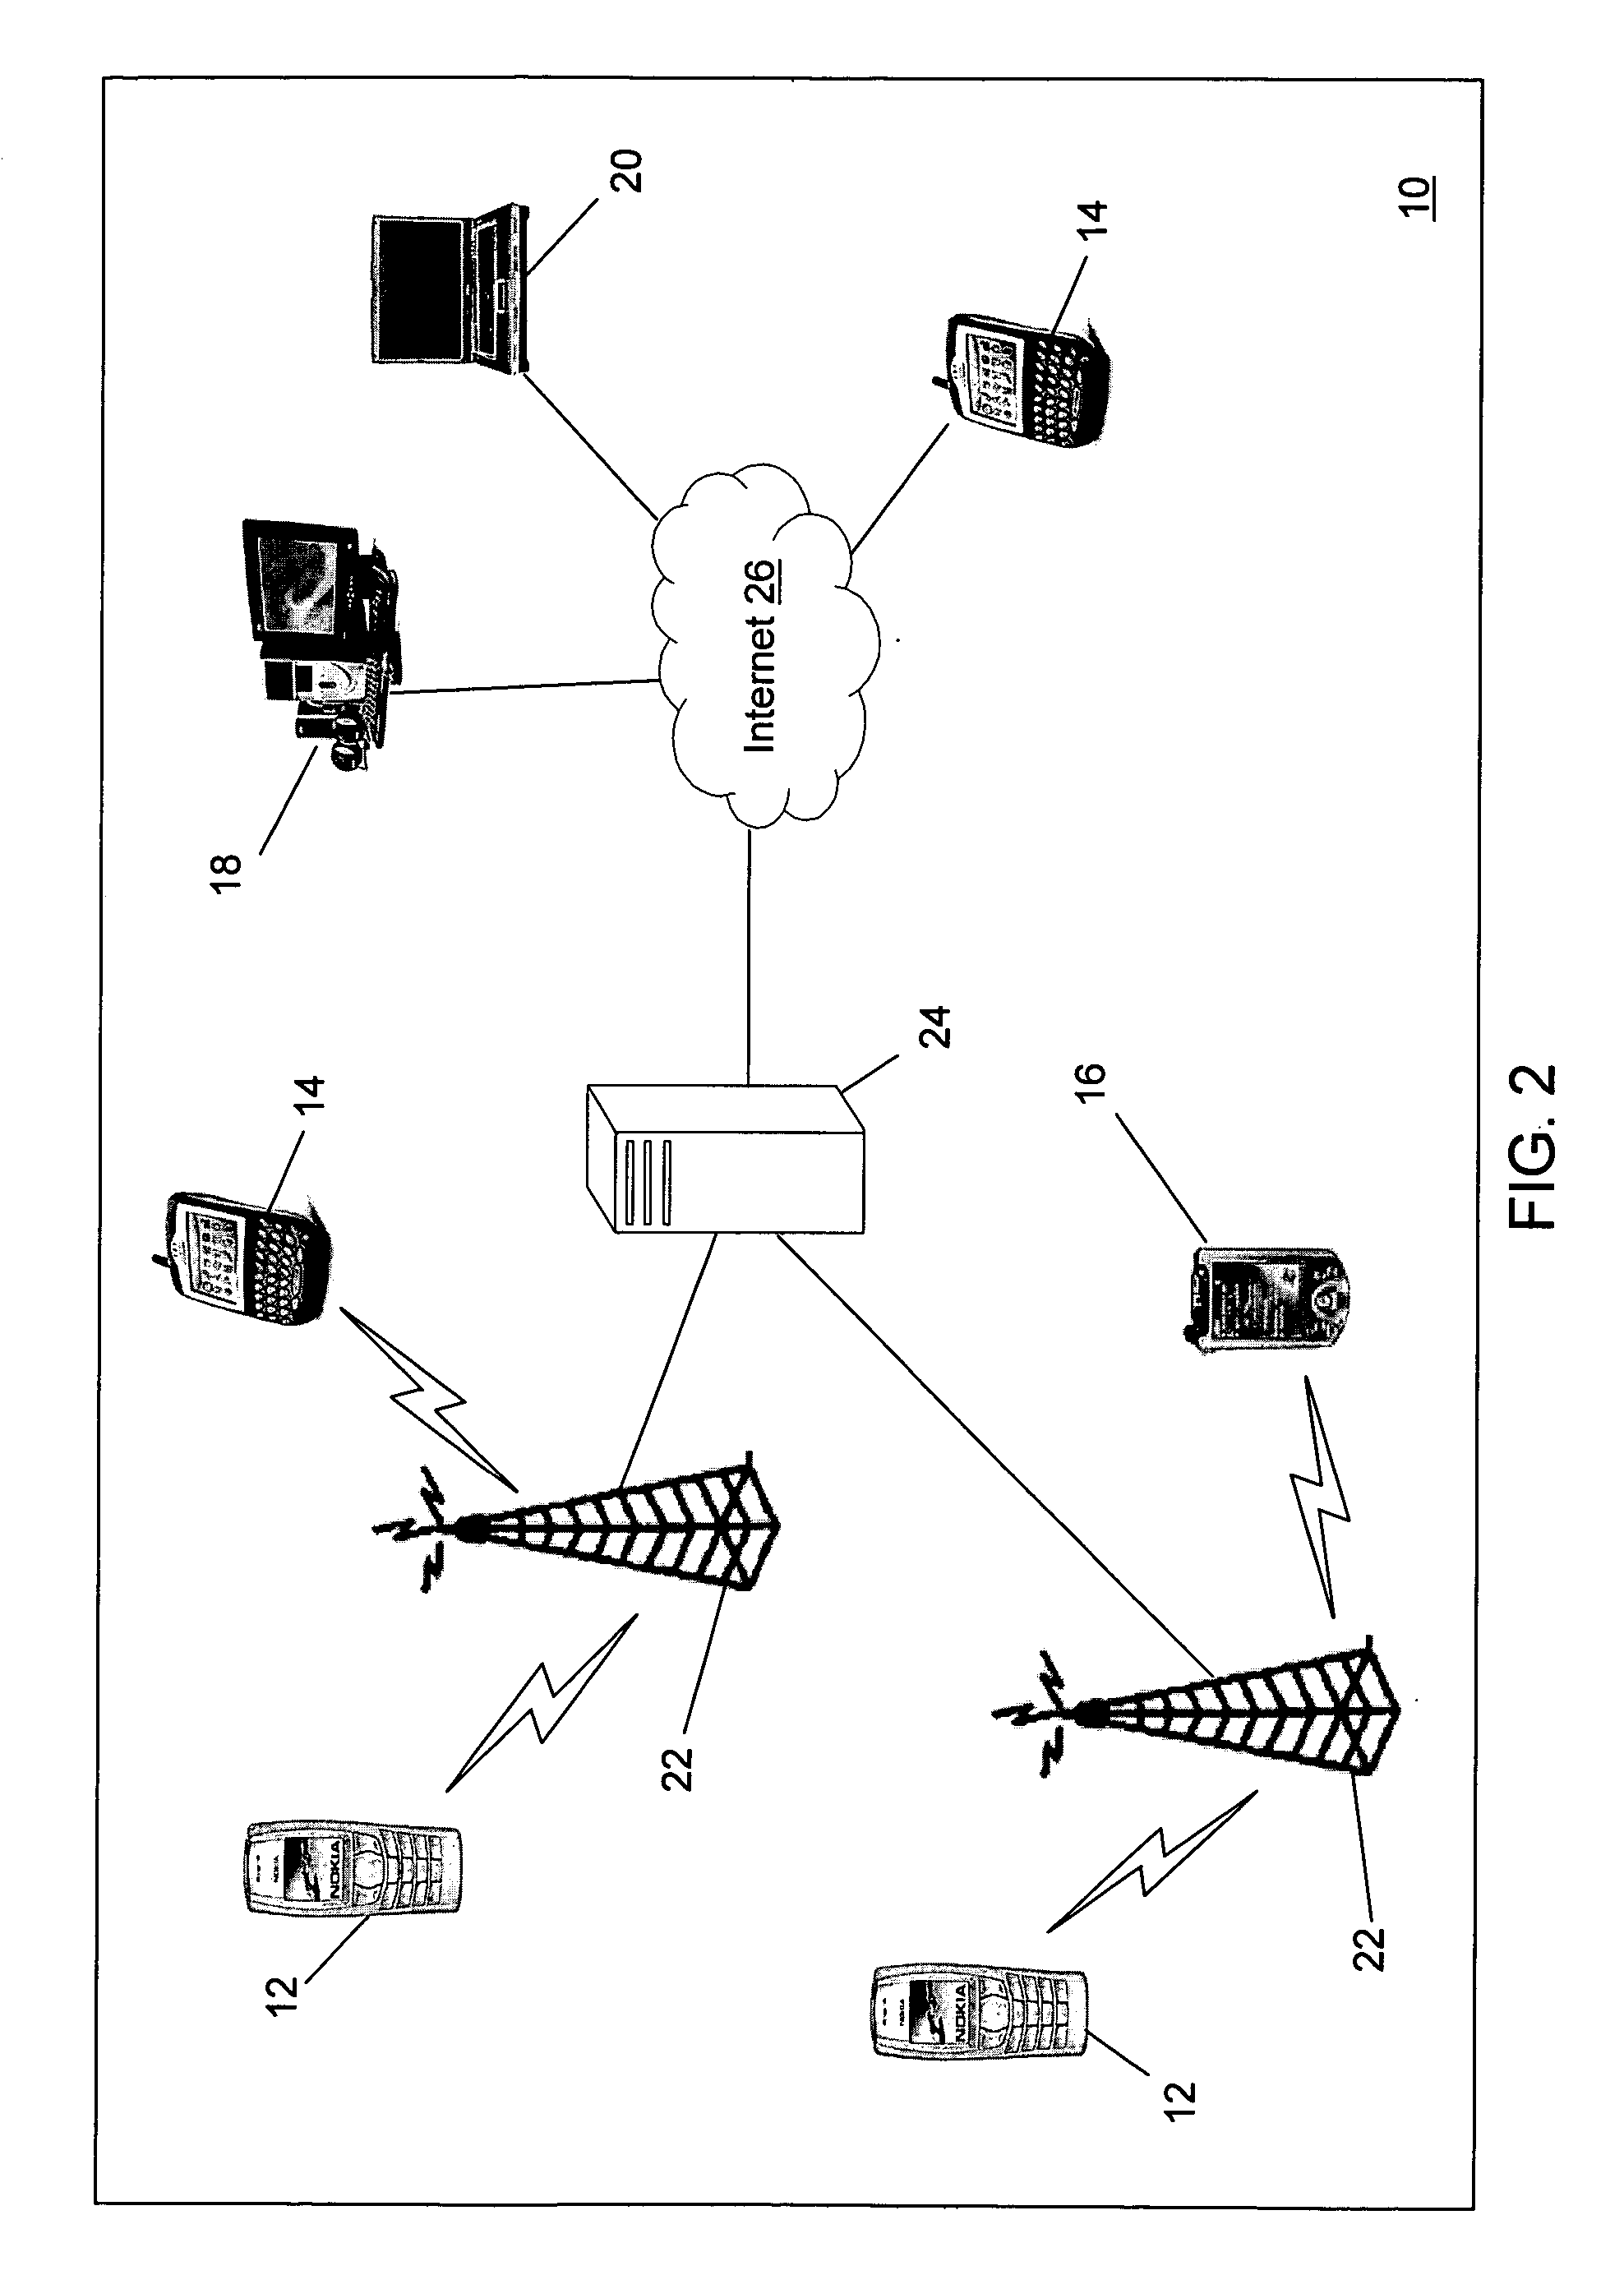 Transmission format indication and feedback in multi-carrier wireless communication systems